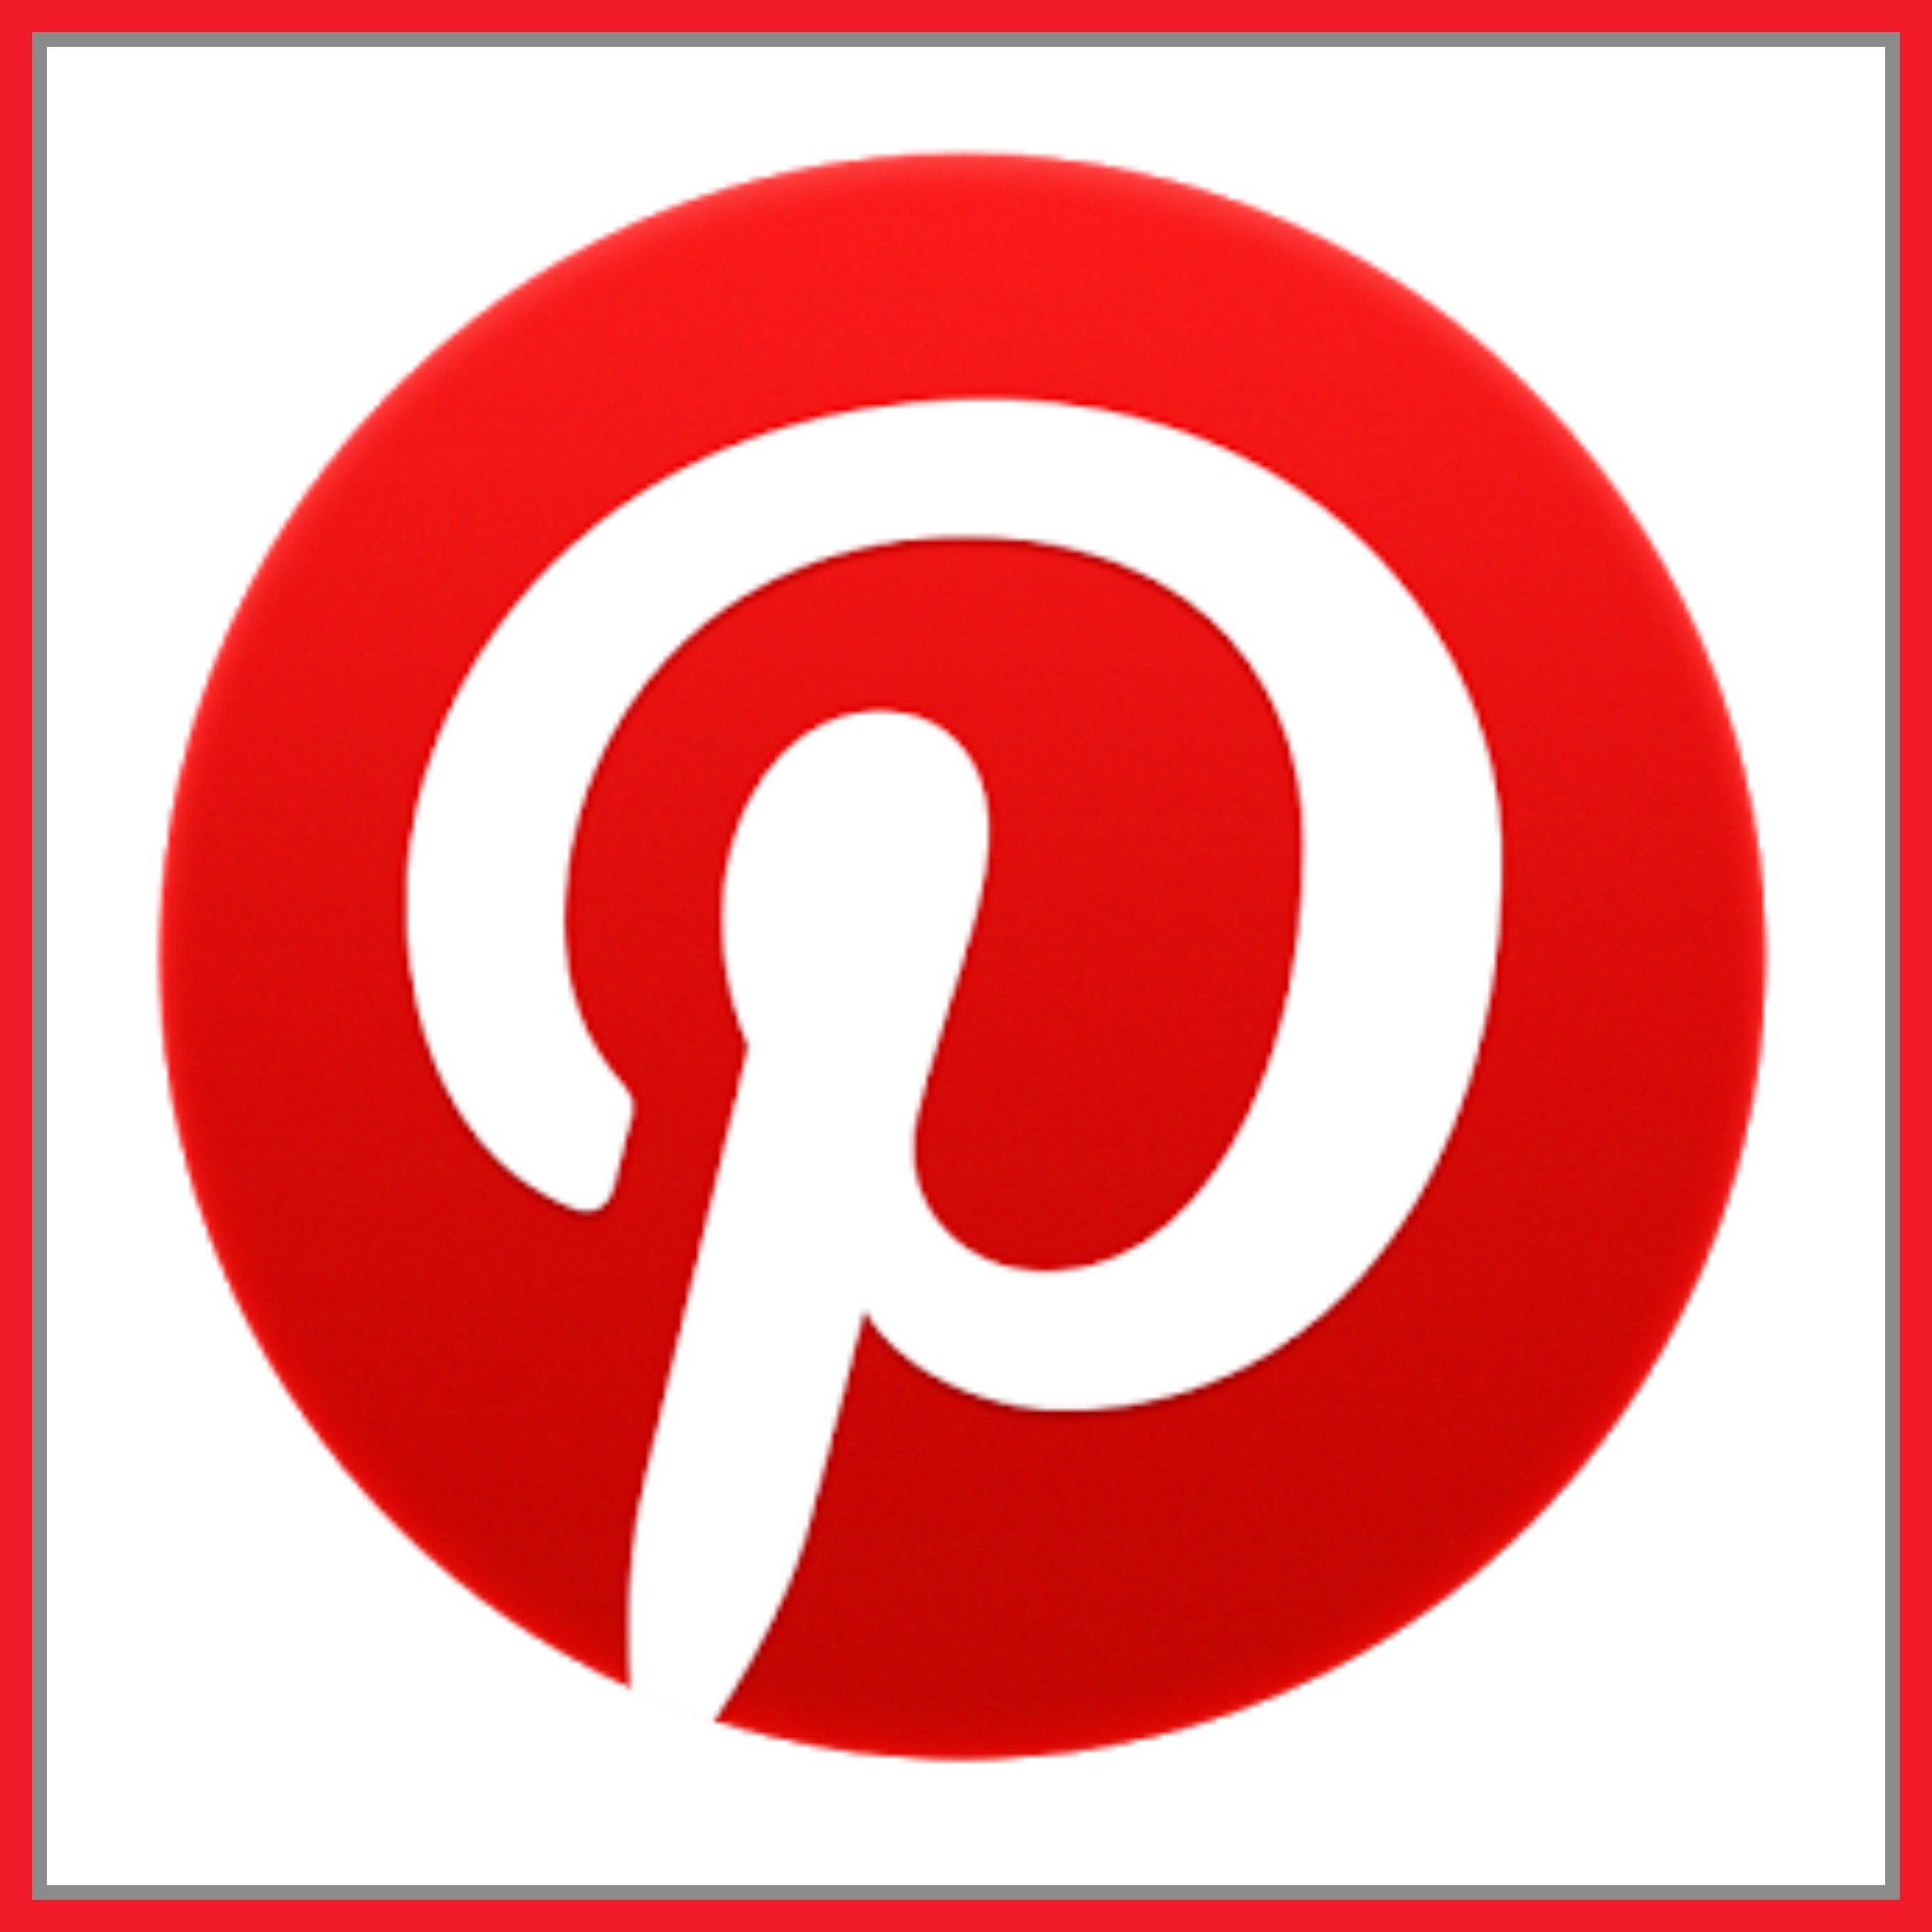 9 Simple Steps to Increase Your Traffic from Pinterest and Gain More Followers